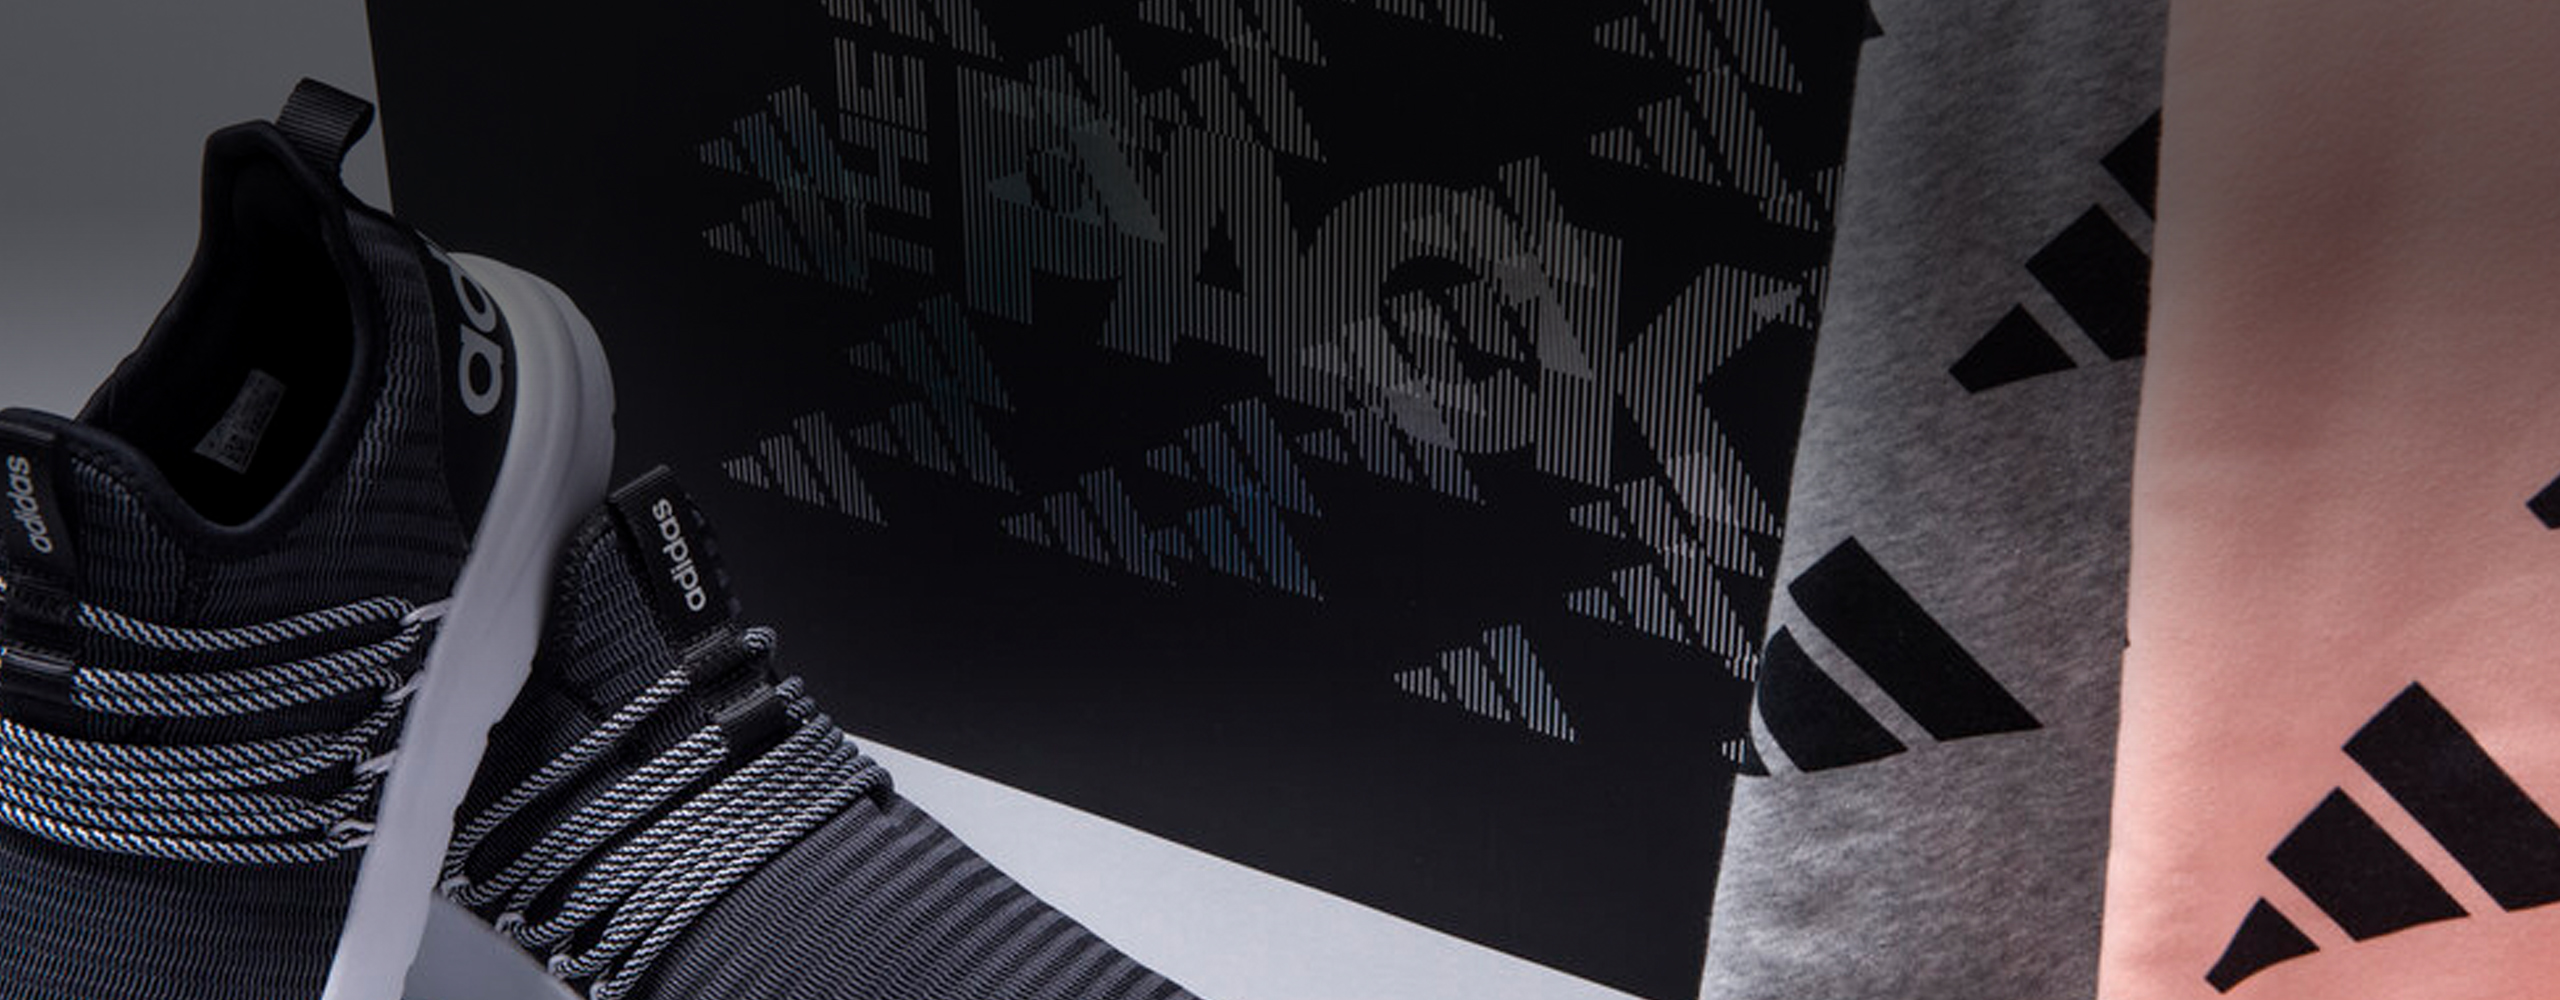 Marketing banner for adidas "The Pack" Seeding Kit